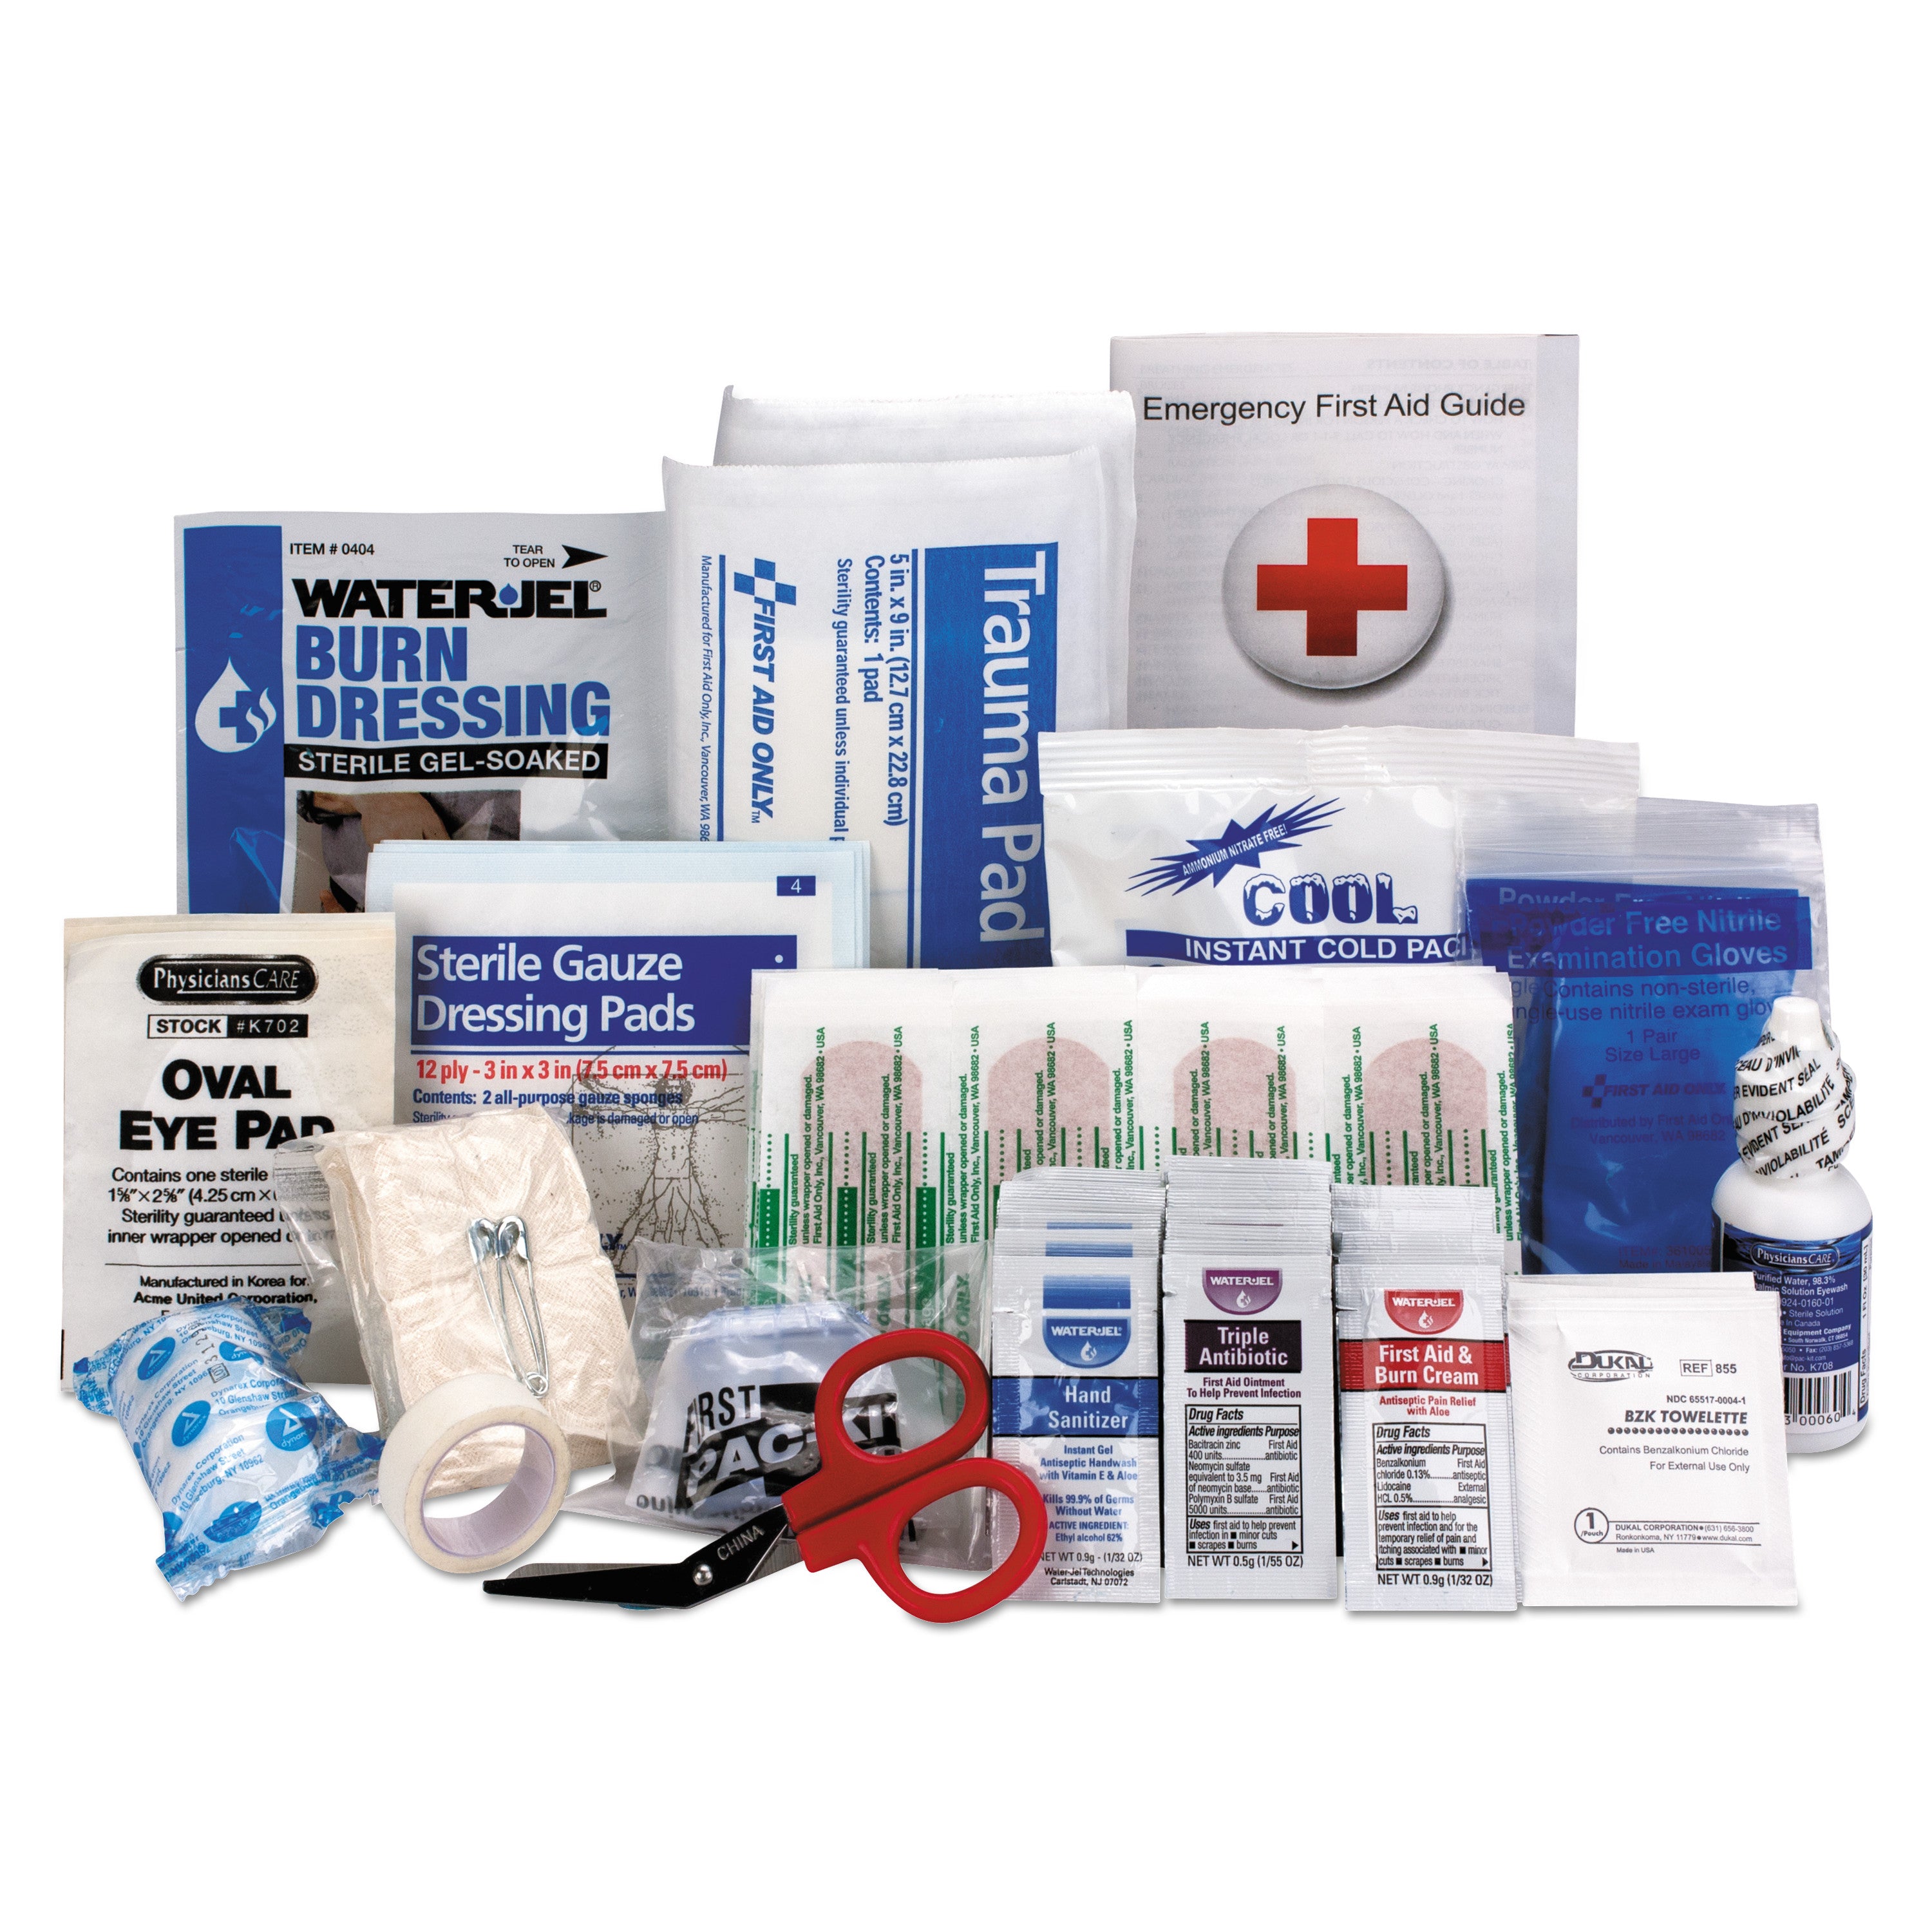 ansi-2015-compliant-first-aid-kit-refill-class-a-25-people-89-pieces_fao90583 - 1